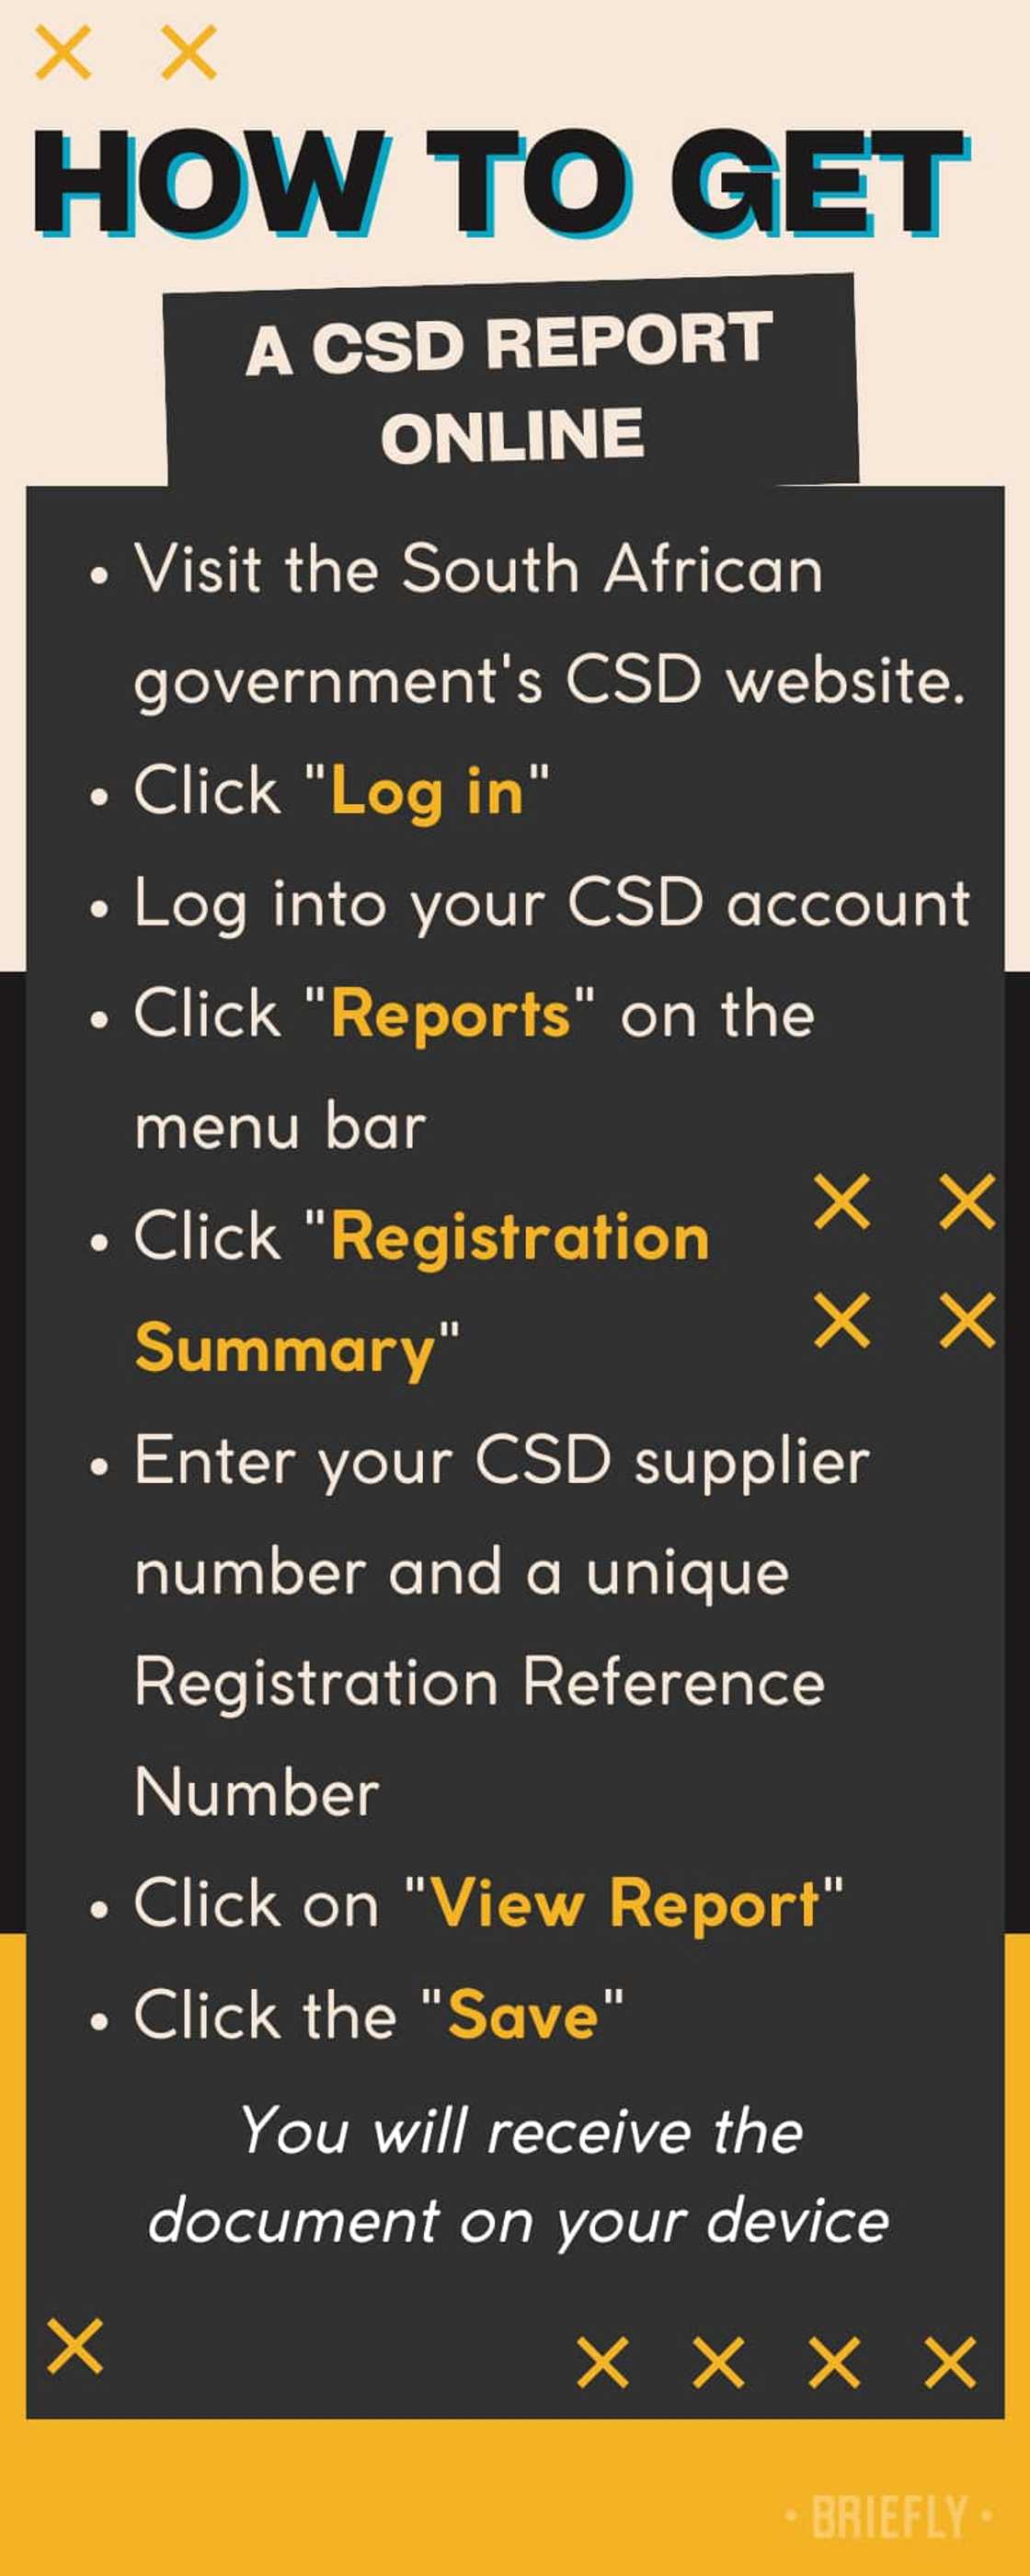 How to get a CSD report online